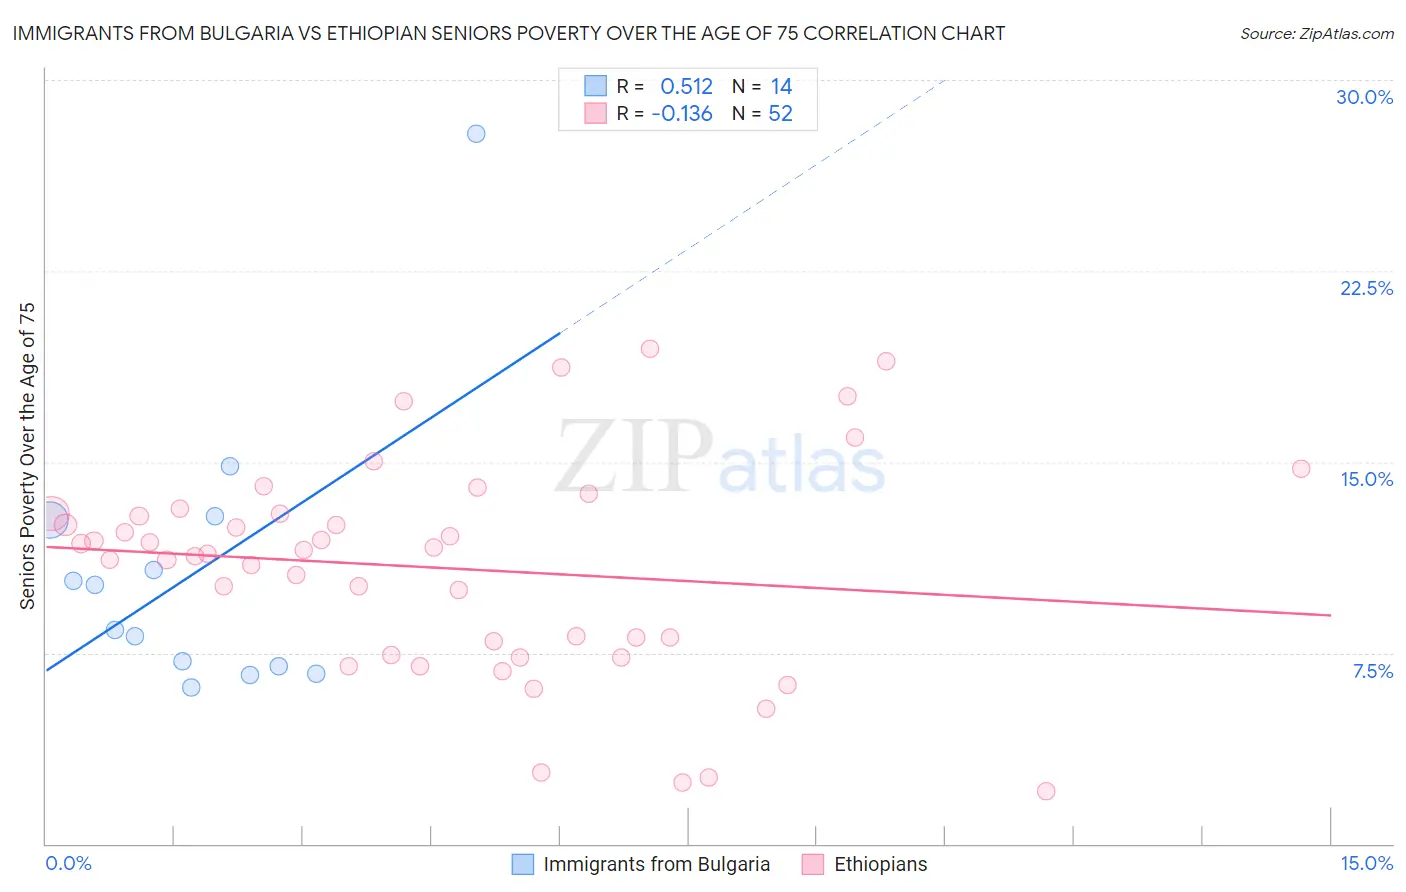 Immigrants from Bulgaria vs Ethiopian Seniors Poverty Over the Age of 75